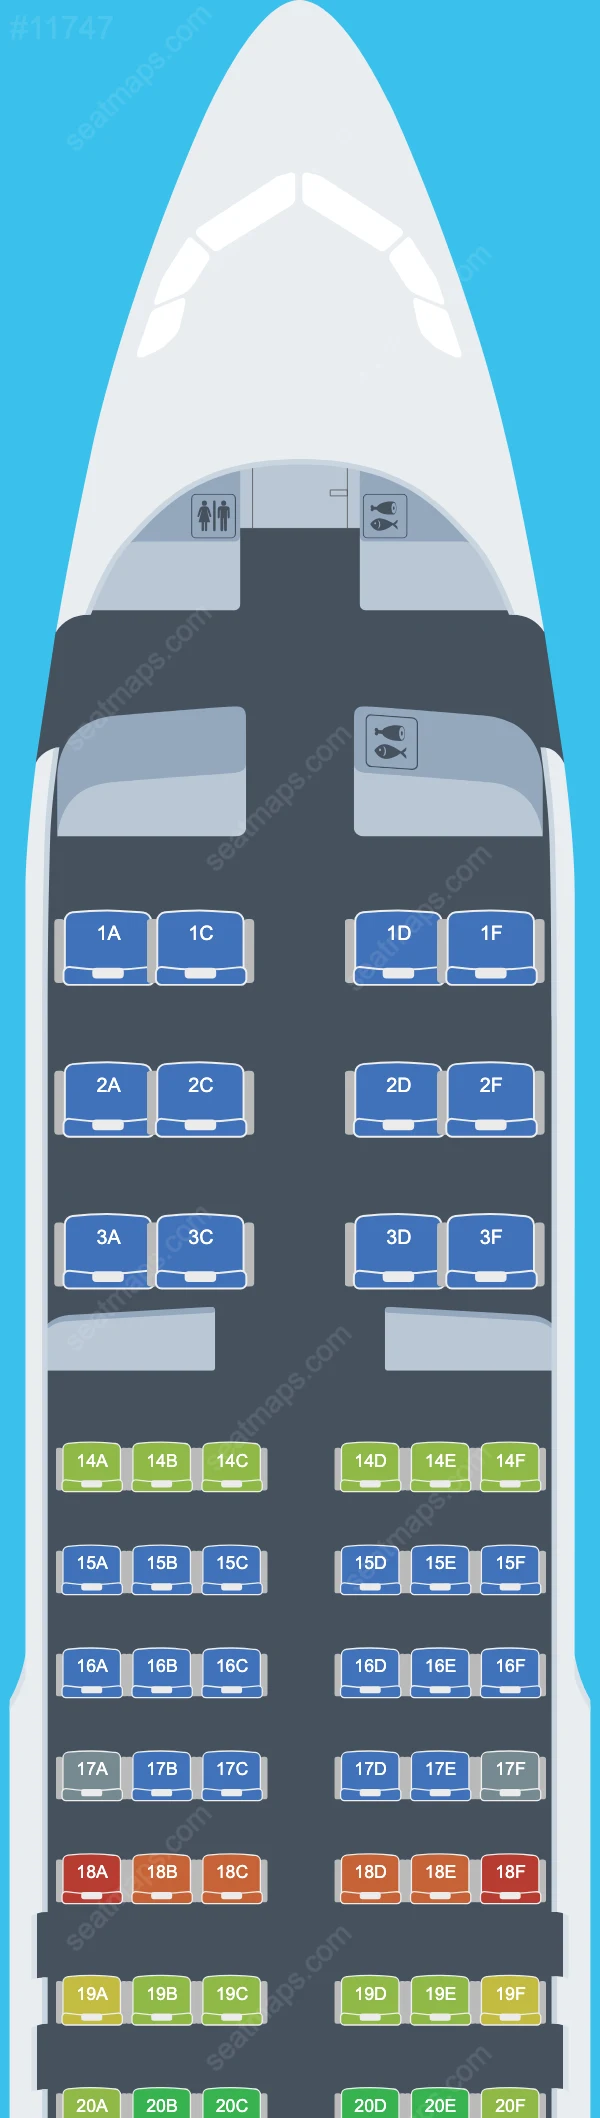 GetJet Airlines Airbus A320 aircraft seat map  A320-200 V.2